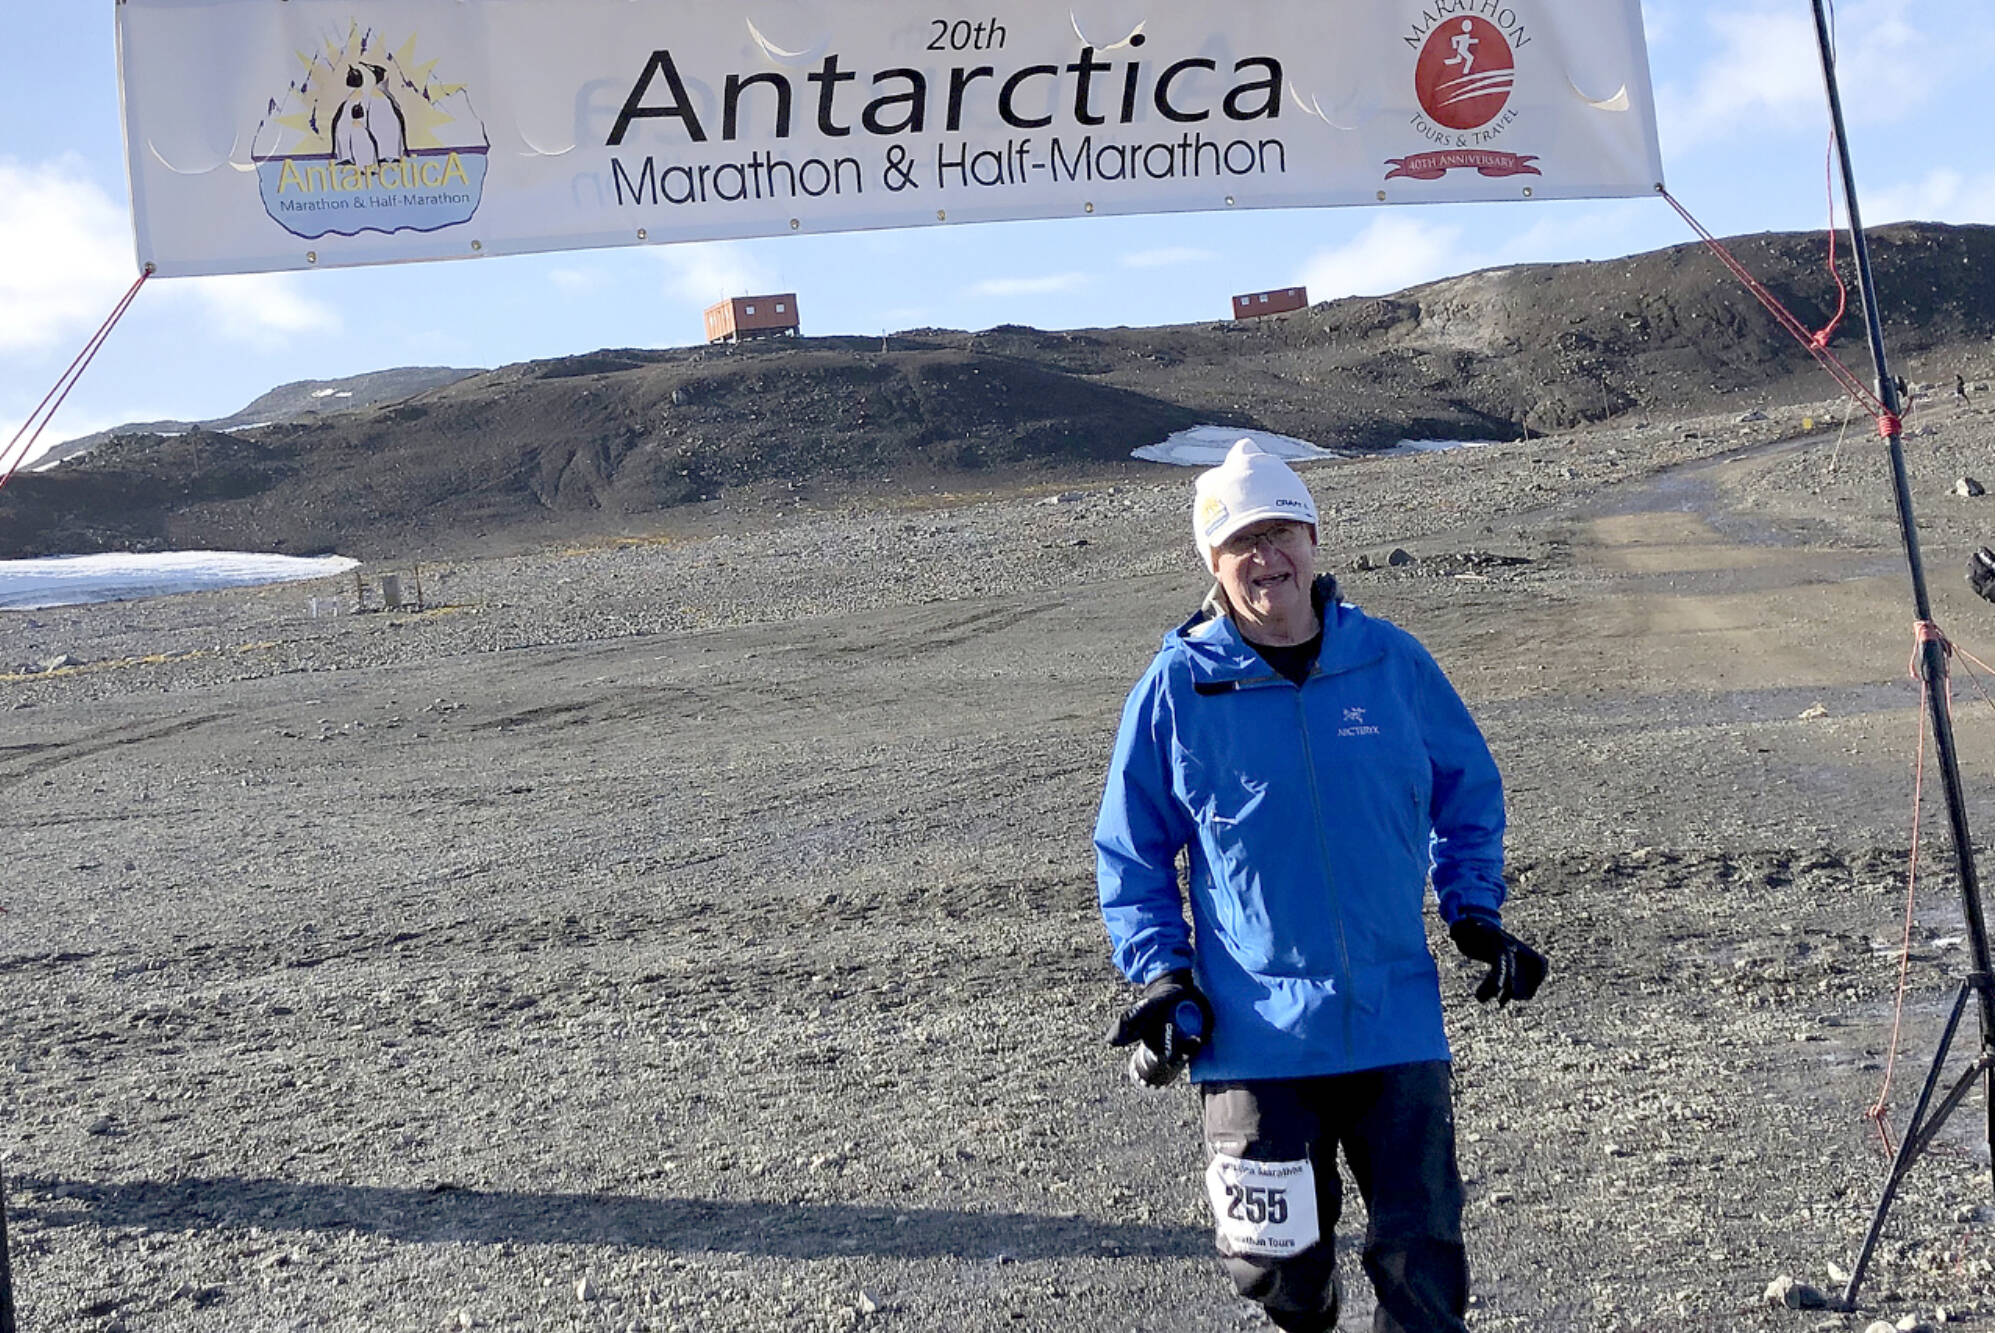 Olympic Medical Foundation Executive Director Bruce Skinner runs in a marathon in Antarctica in 2019. Skinner, who ran the Fiesta Bowl from 1980 to 1990, is being inducted into the Bowl Season Leadership Hall of Fame on Jan. 1.